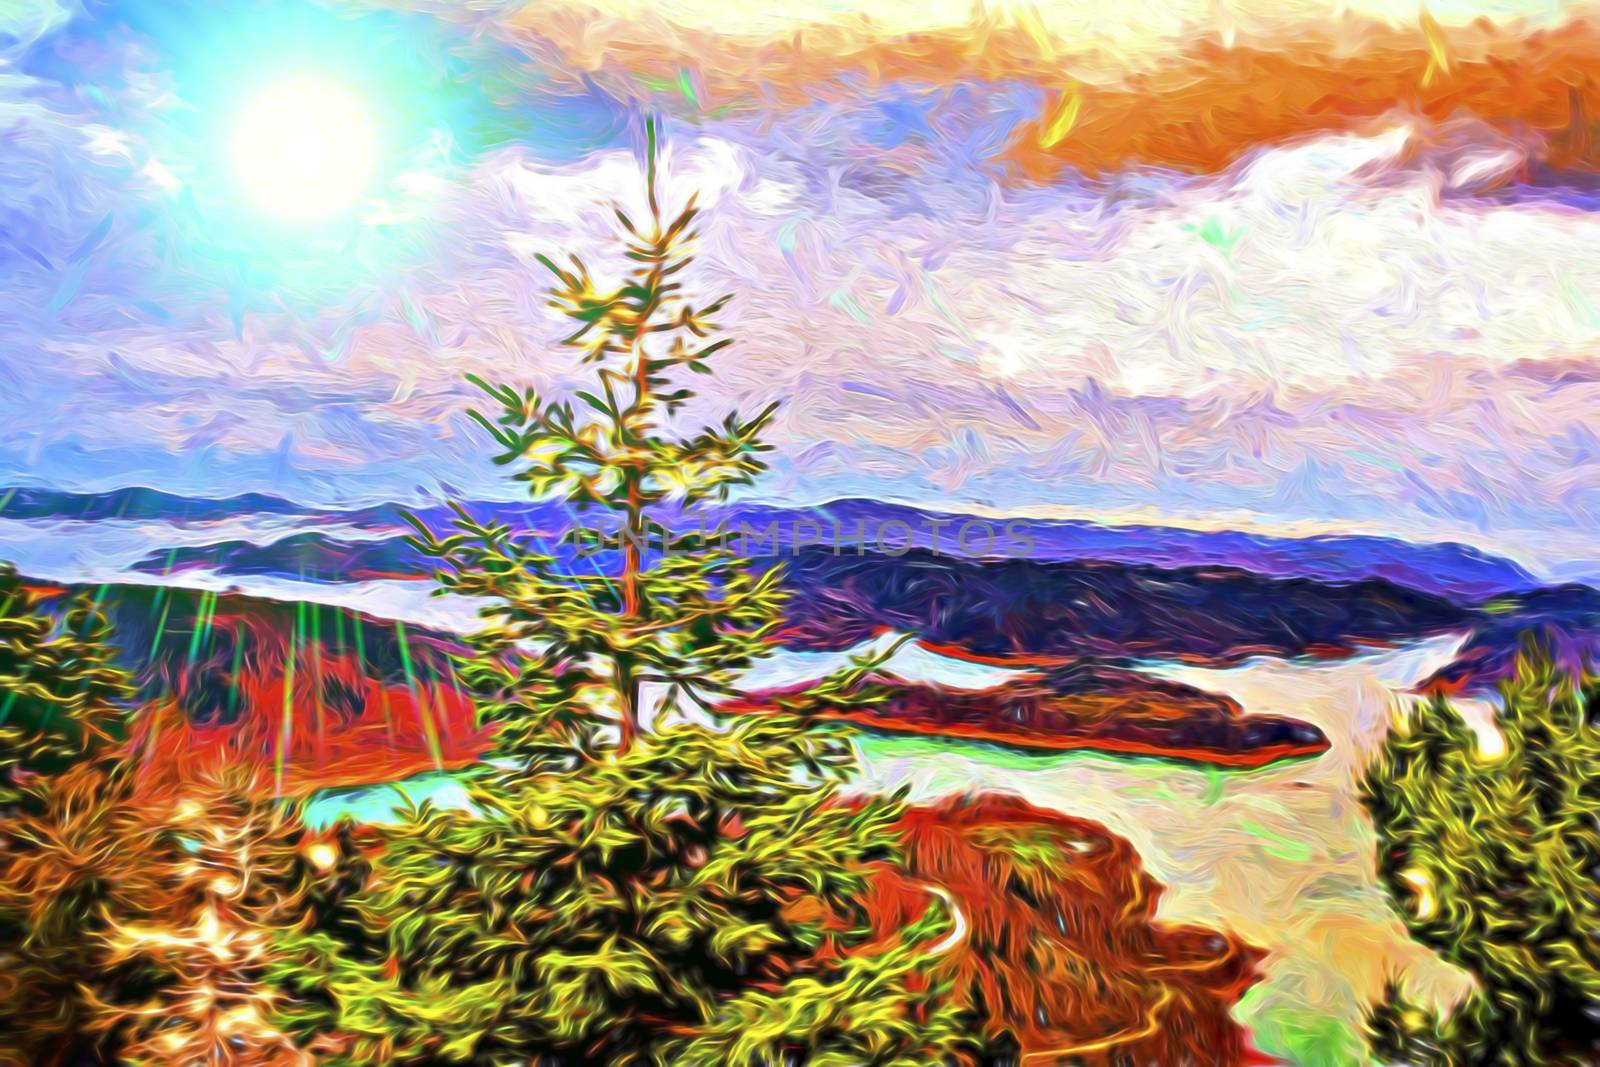 Plastiras lake panoramic view in central Greece. Digital paint.